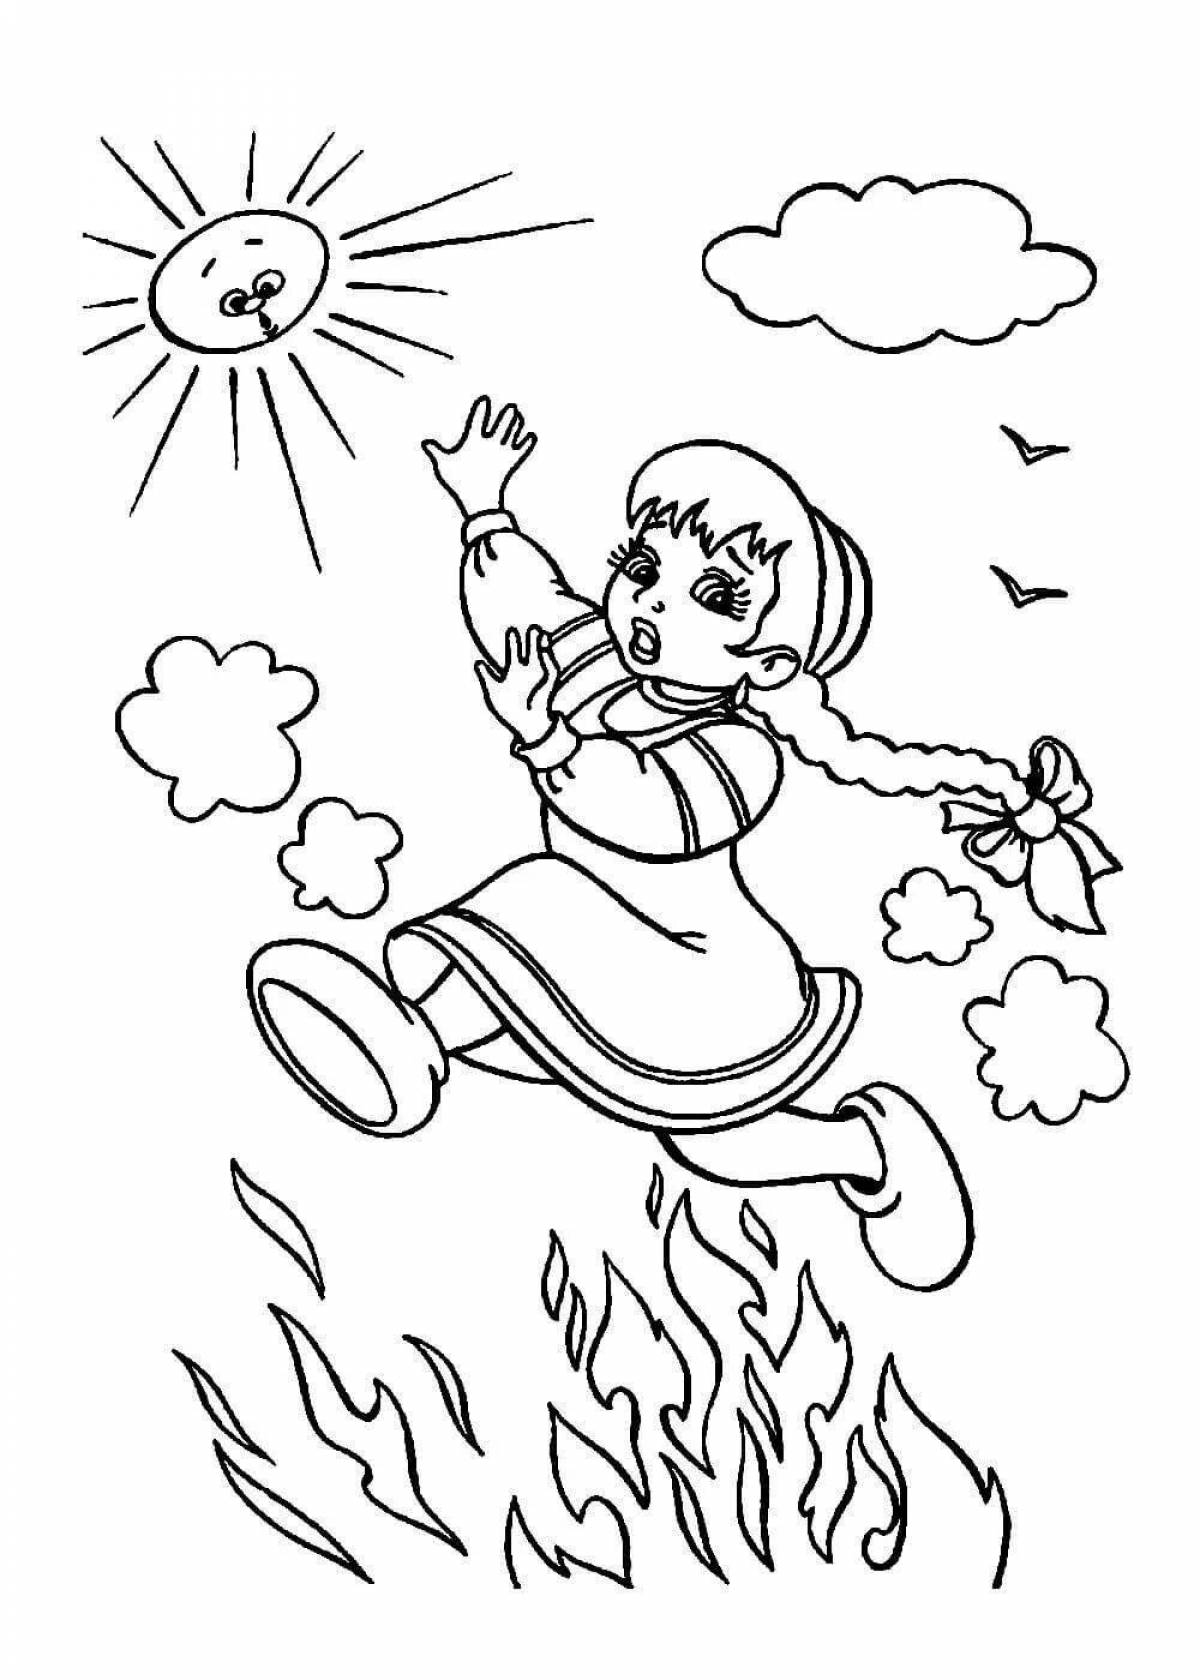 Fantastic jumping fire coloring page